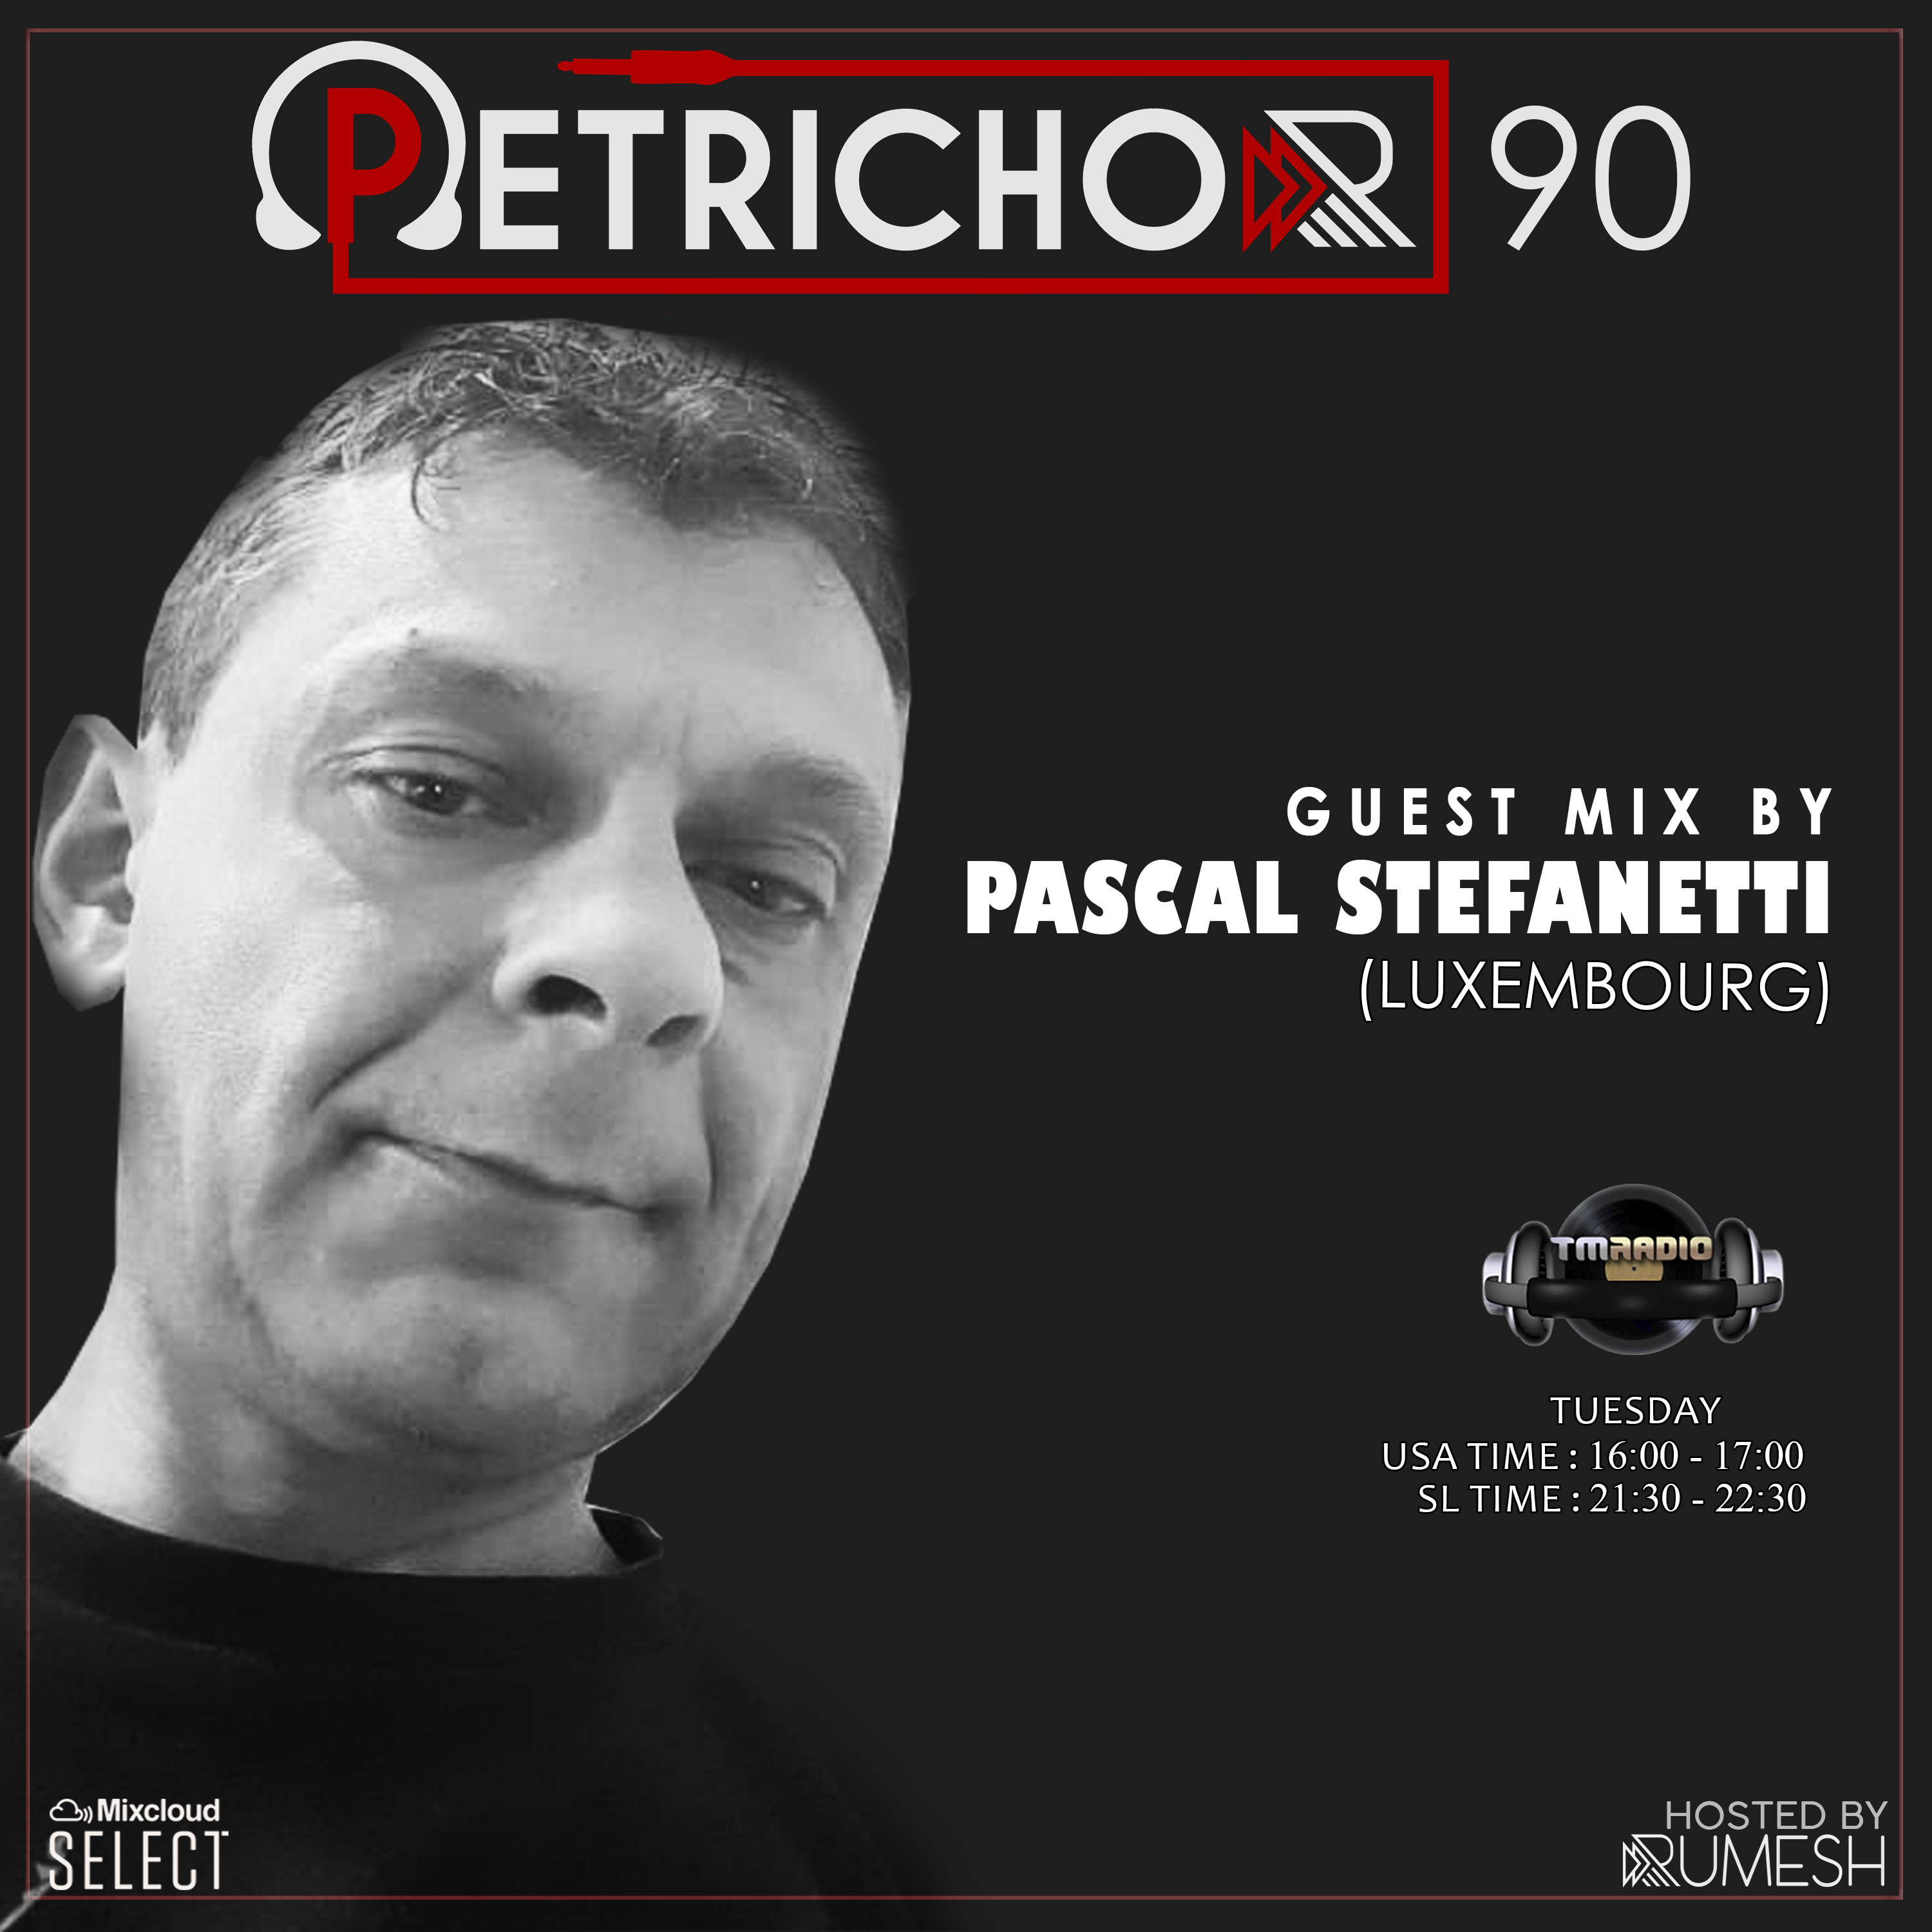 Petrichor :: Petrichor 90 guest mix by Pascal Stefanetti (Luxembourg) (aired on September 15th, 2020) banner logo